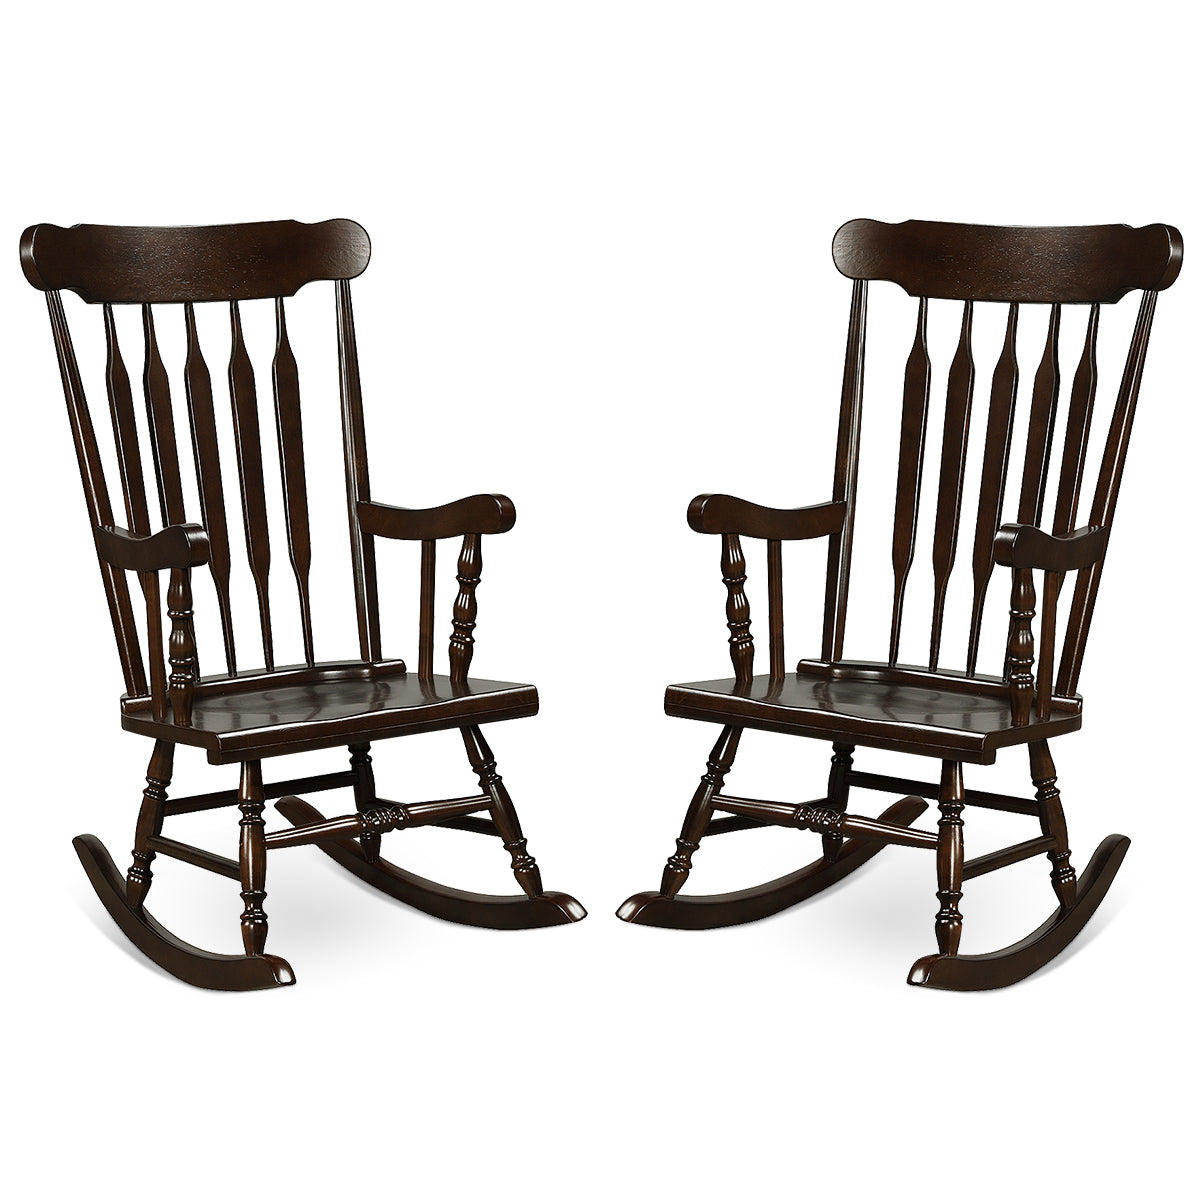 Giantex Outdoor Wood Rocking Chair - Set of 2 Patio Rocking Chair with Solid Frame